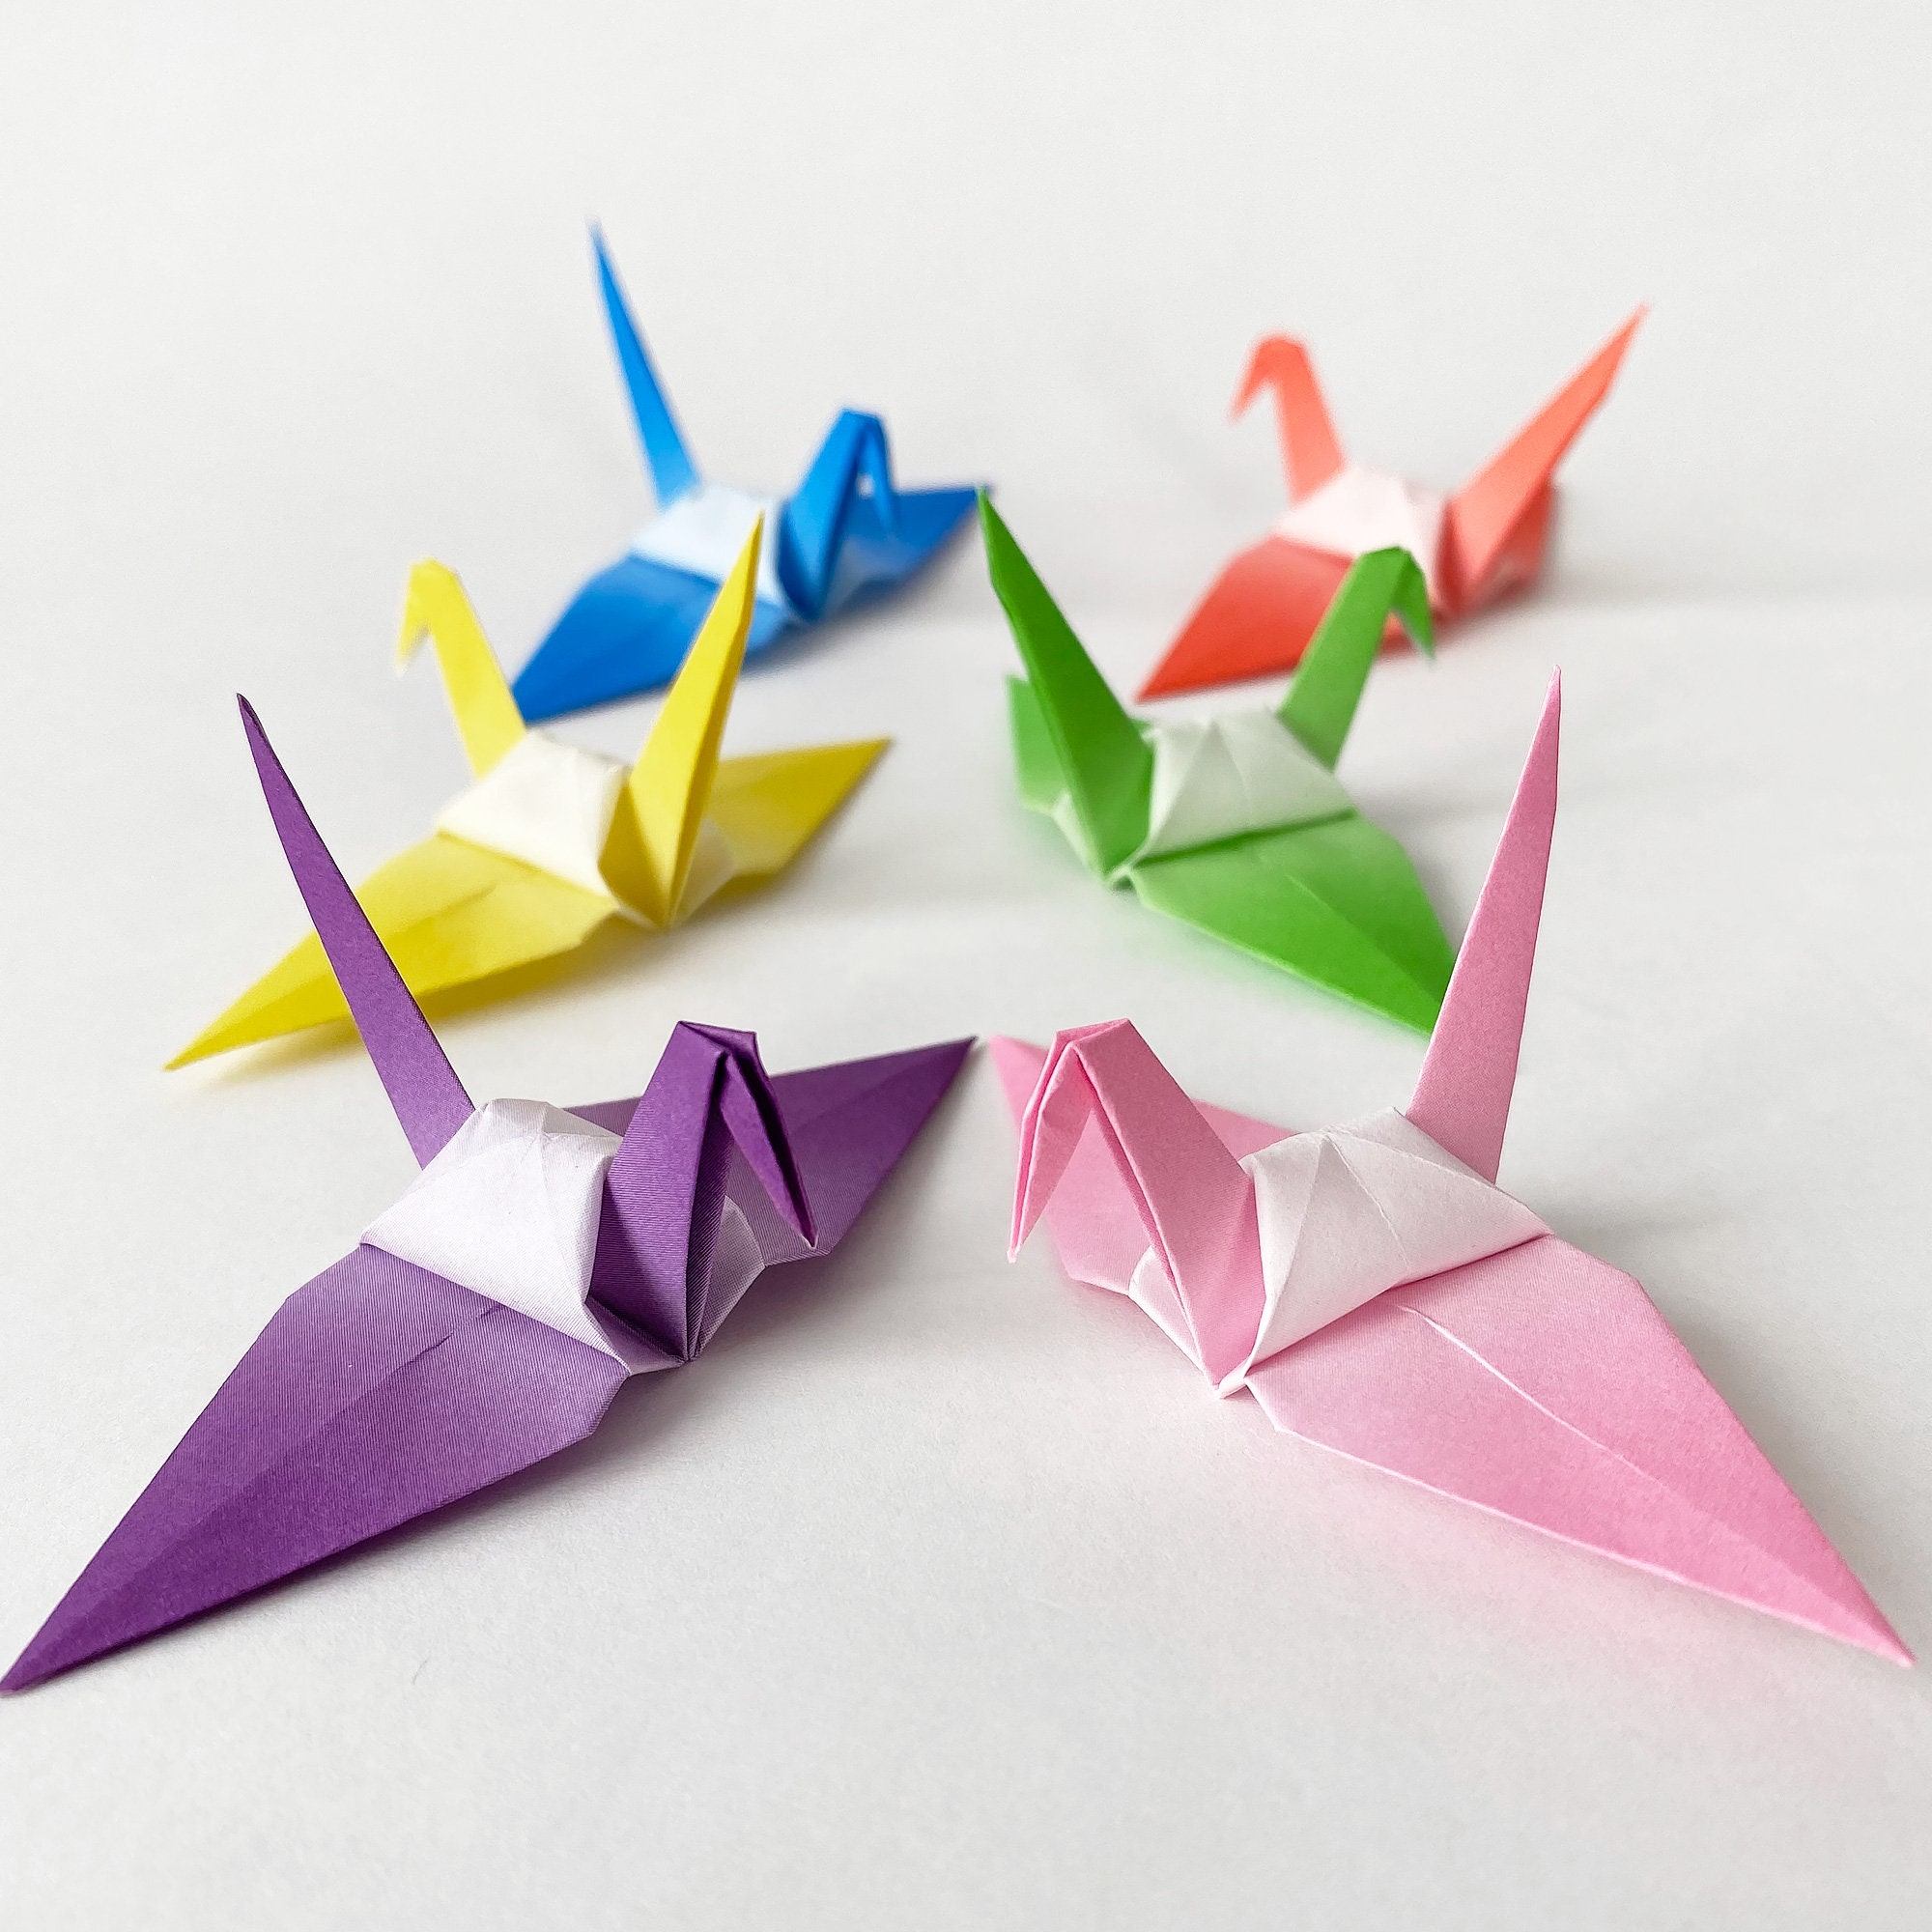 100 Large Origami Cranes Origami Paper Cranes Made of 15cm 6 Japanese Paper  5 Green Colors Gradation Tone Shade Wedding Decoration -  Denmark